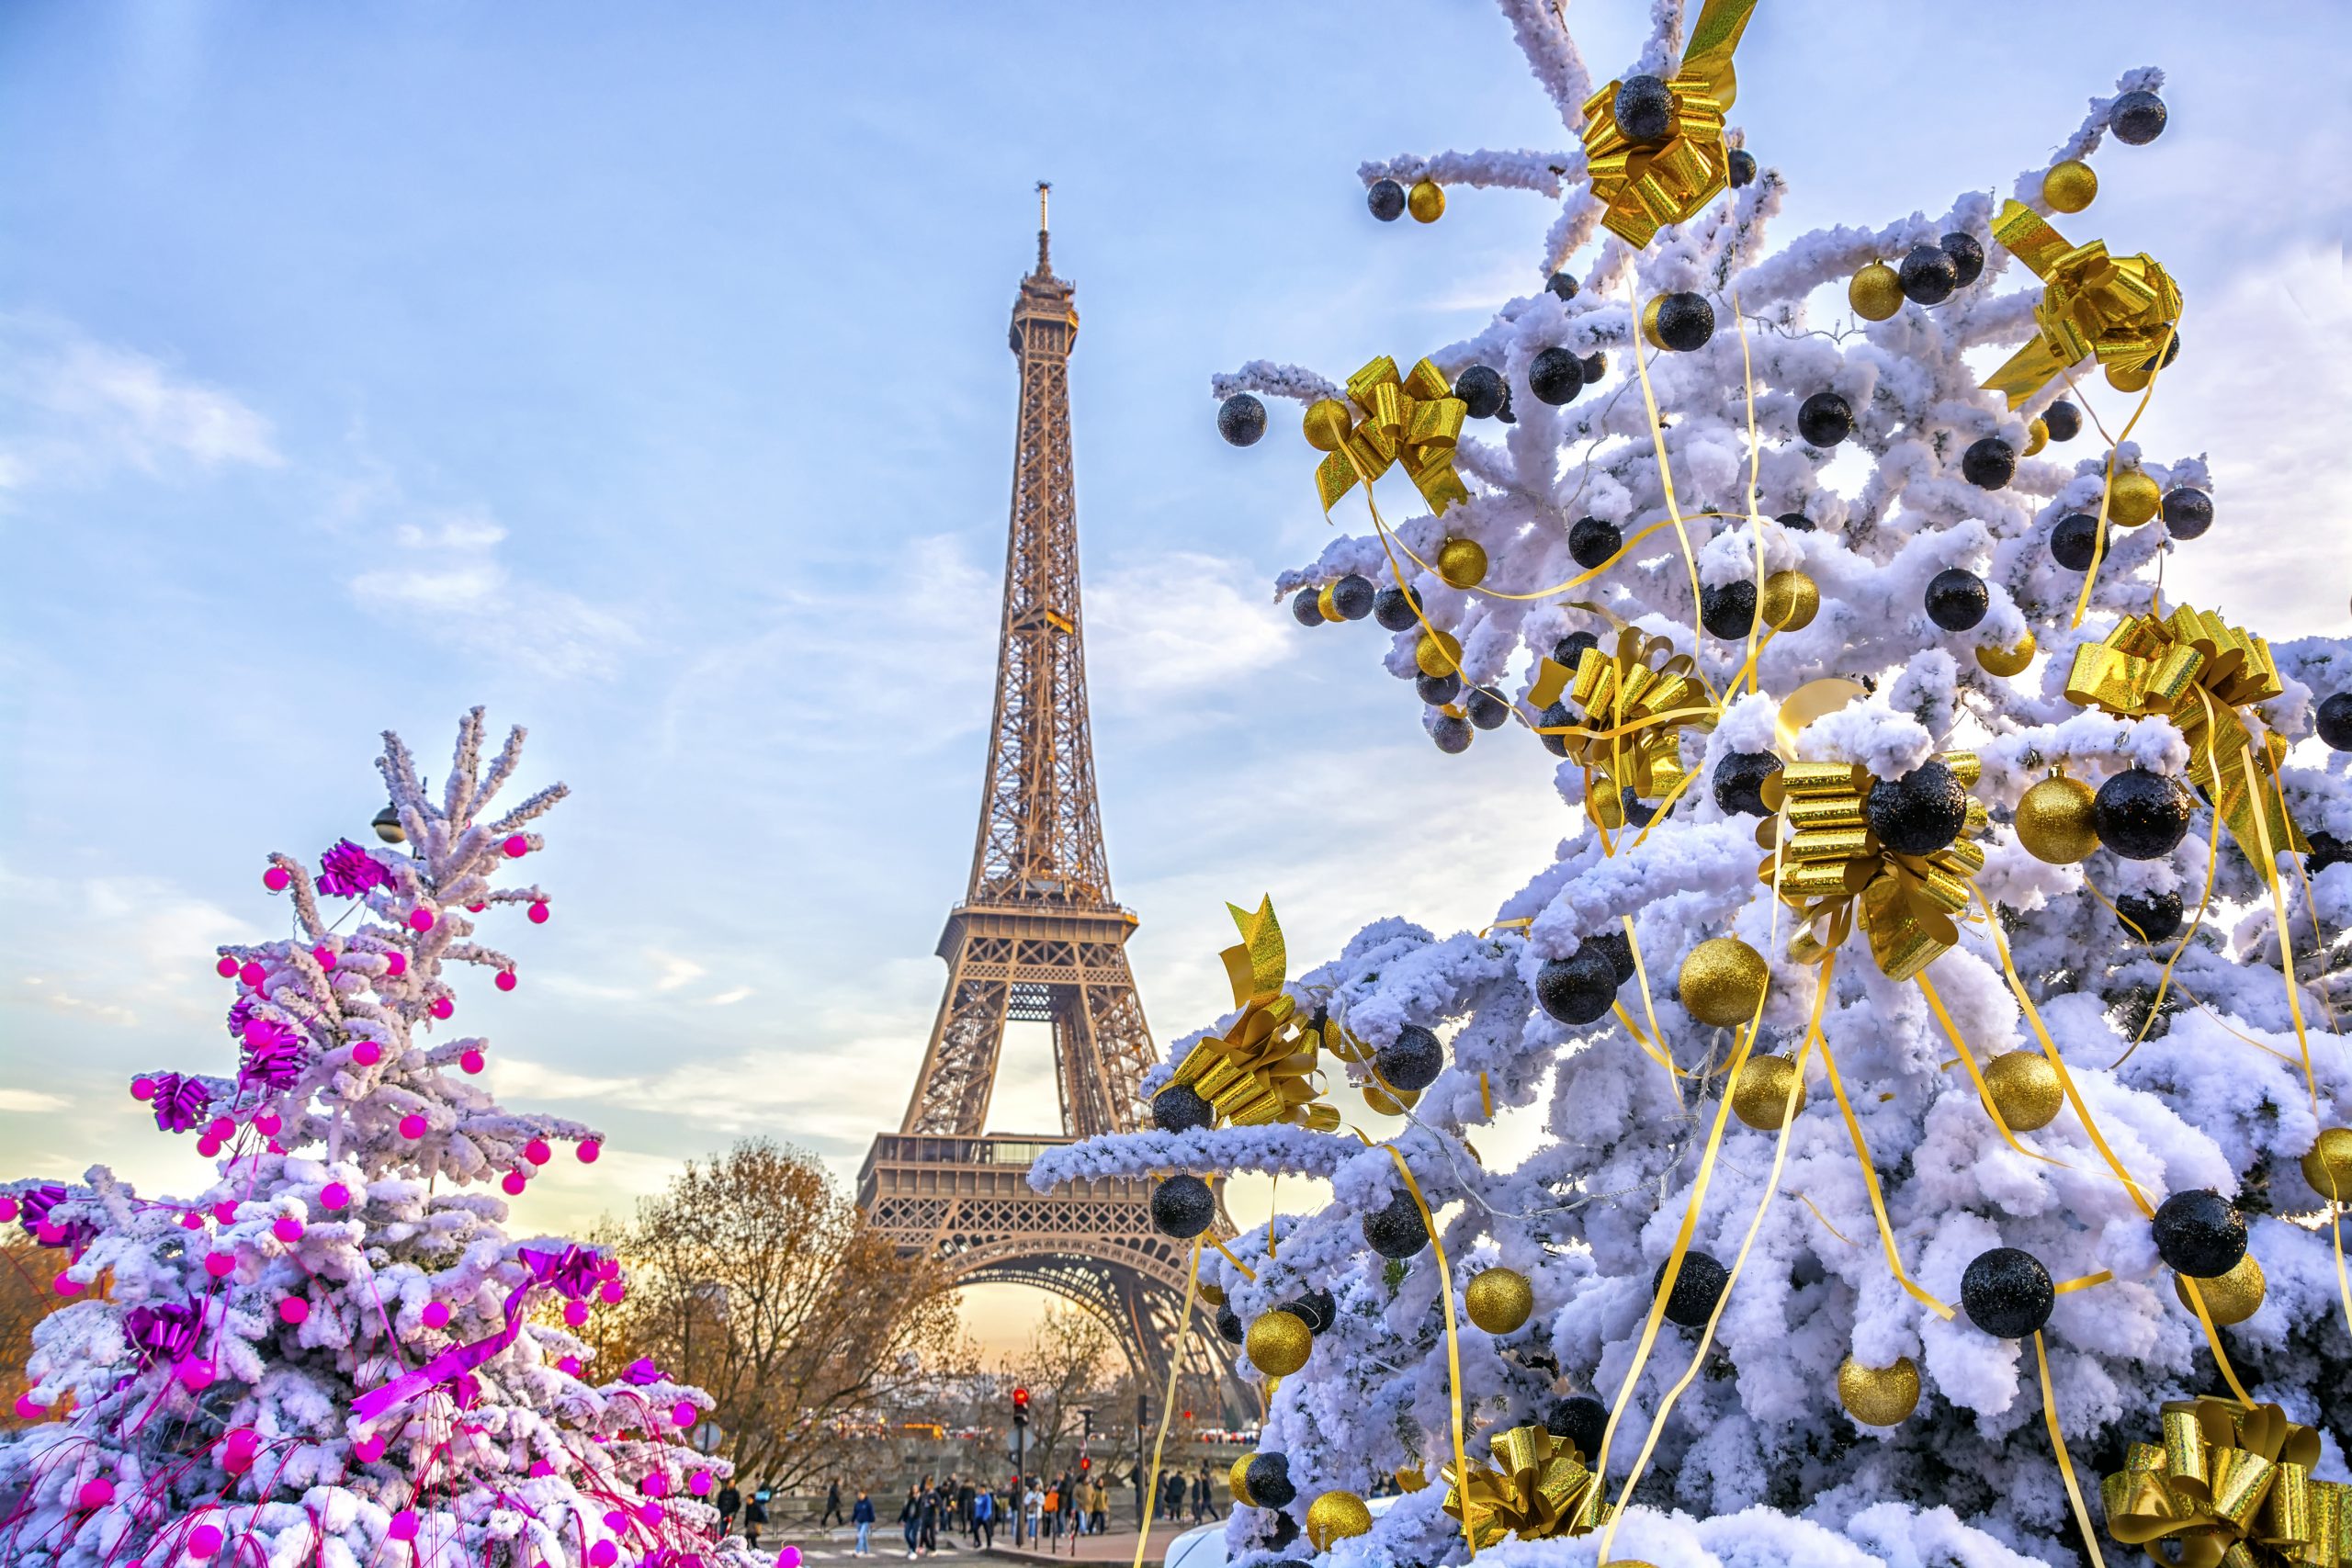 Paris is one of the most beautiful European cities and, at the same time, with a great Christmas spirit